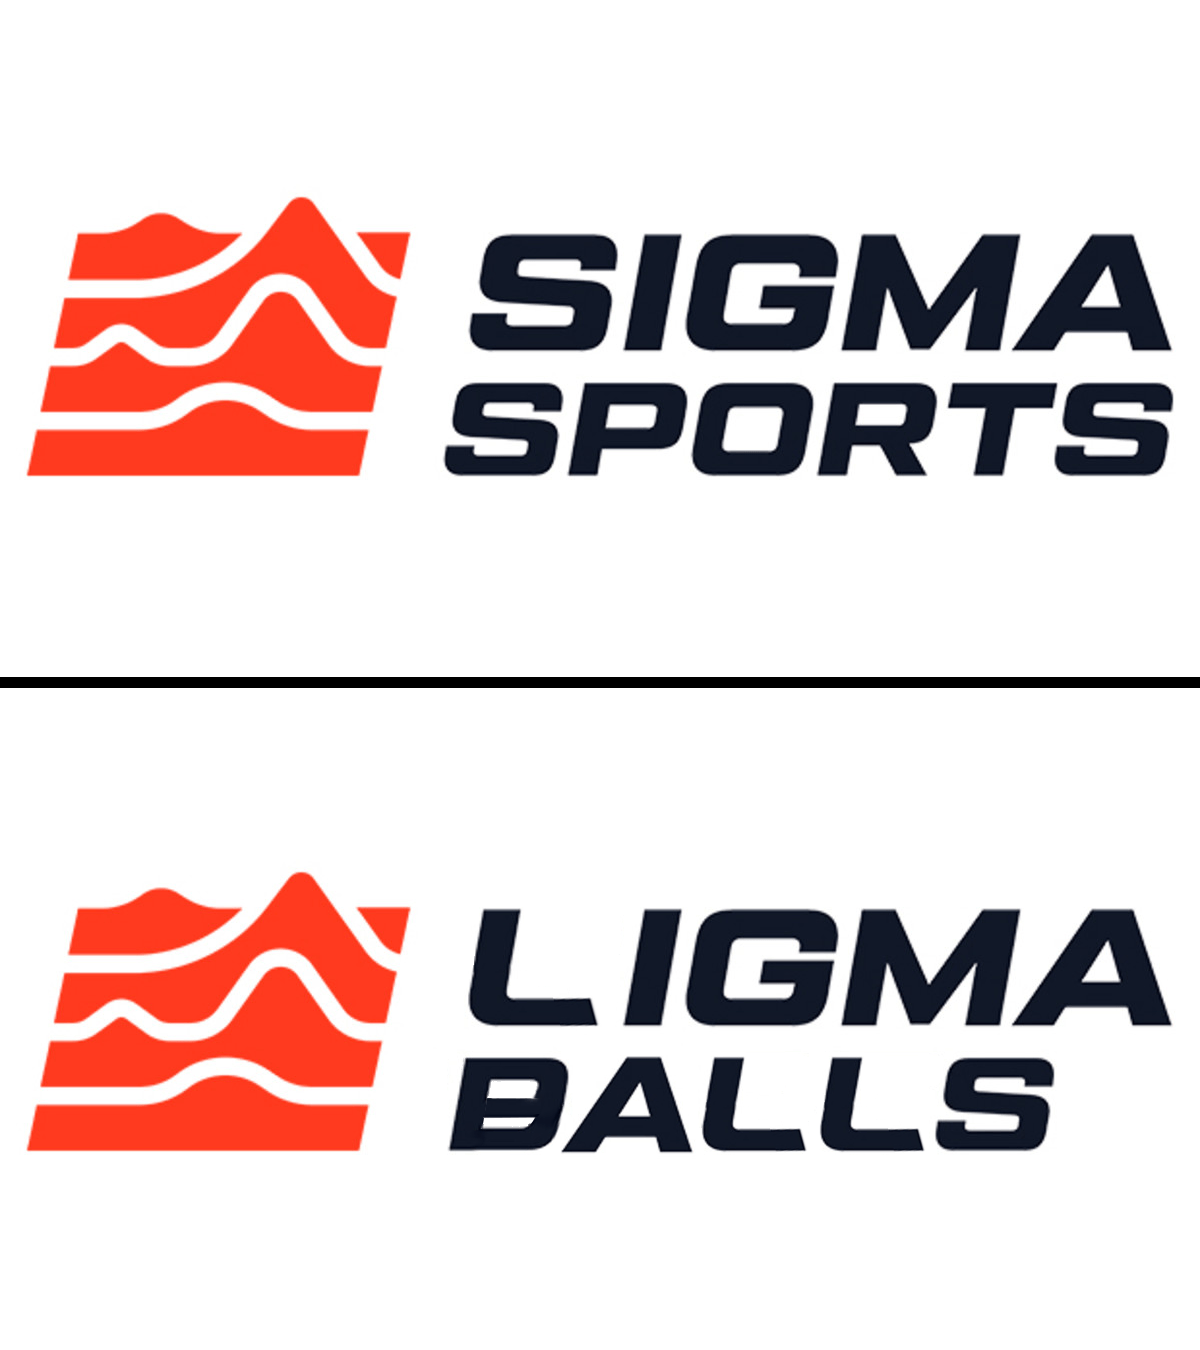 Well Known Sports Logo - Included the original logo since it's not as well known